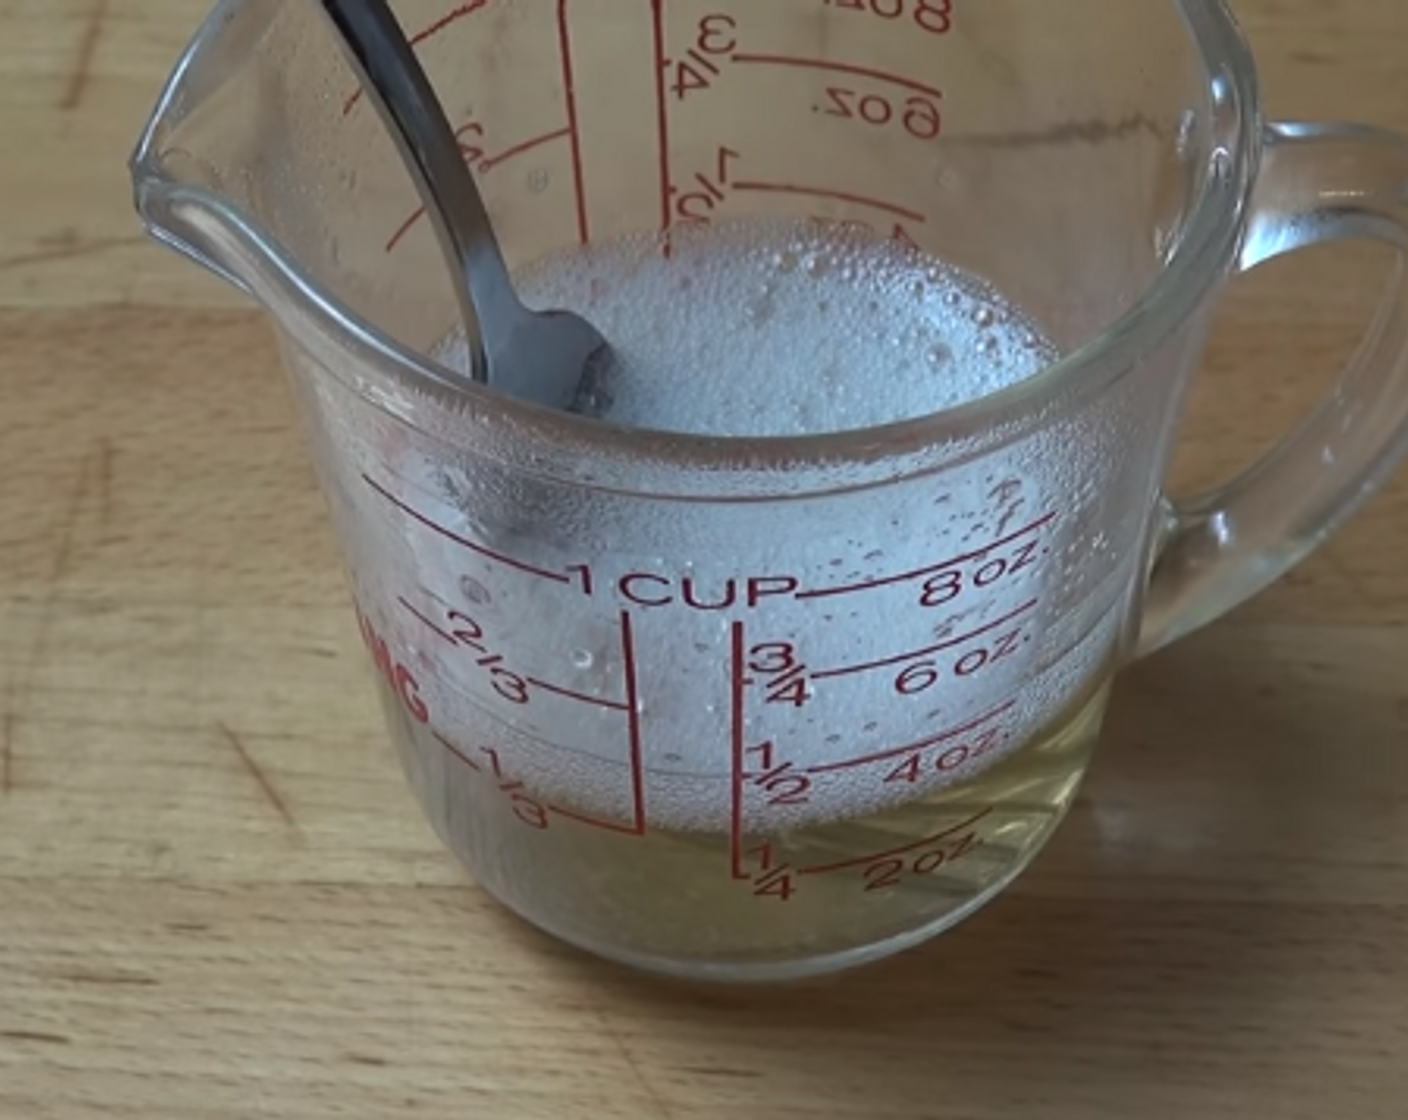 step 3 In a heat-proof cup containing Water (1/4 cup), add the Gelatin Powder (1 Tbsp). Using a fork, mix together until the gelatine is completely dissolved. Set aside to cool.